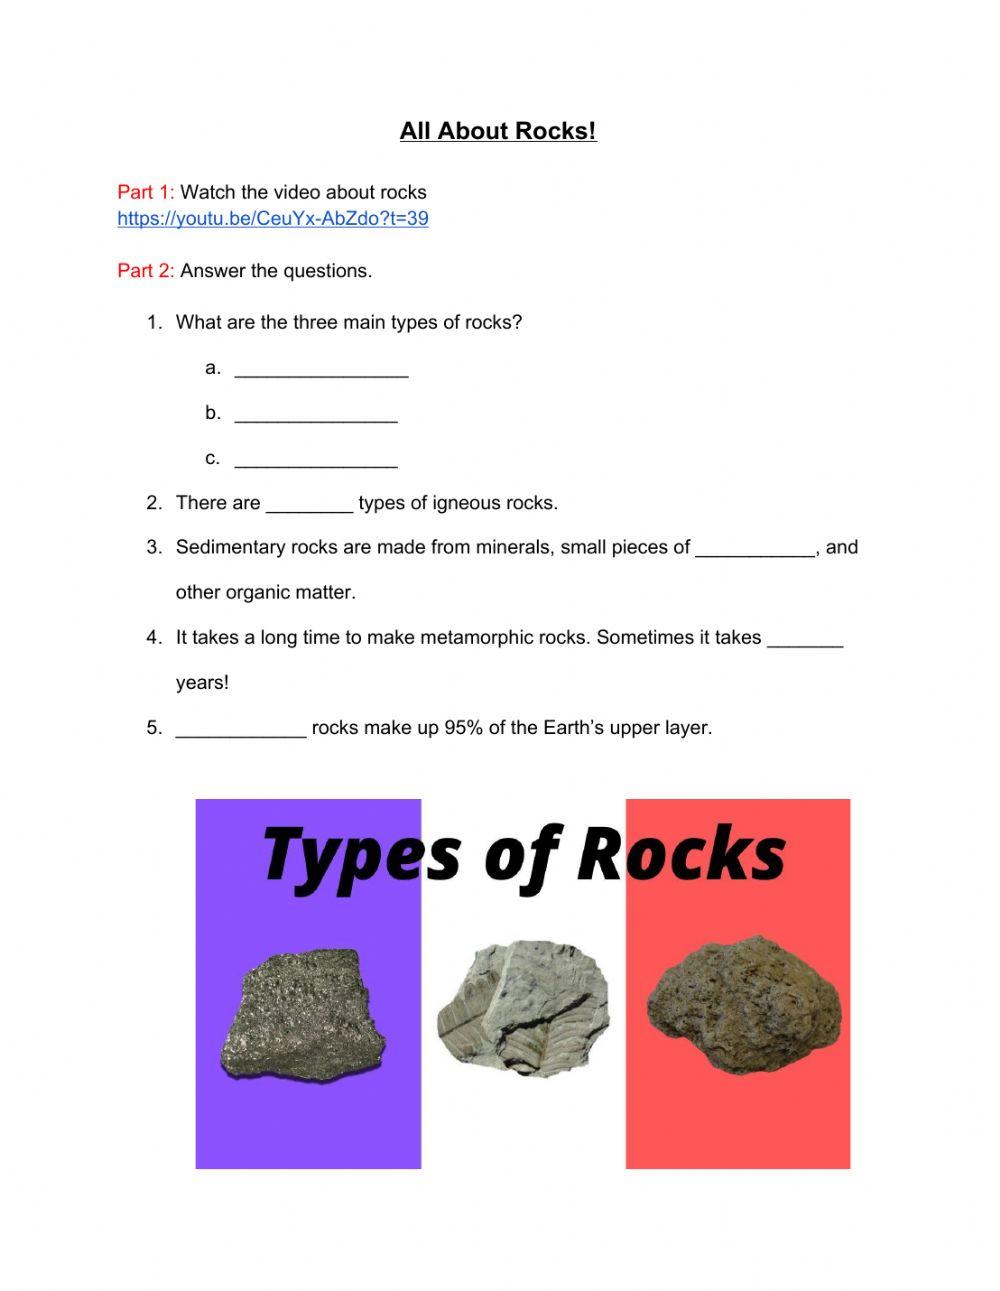 All about Rocks